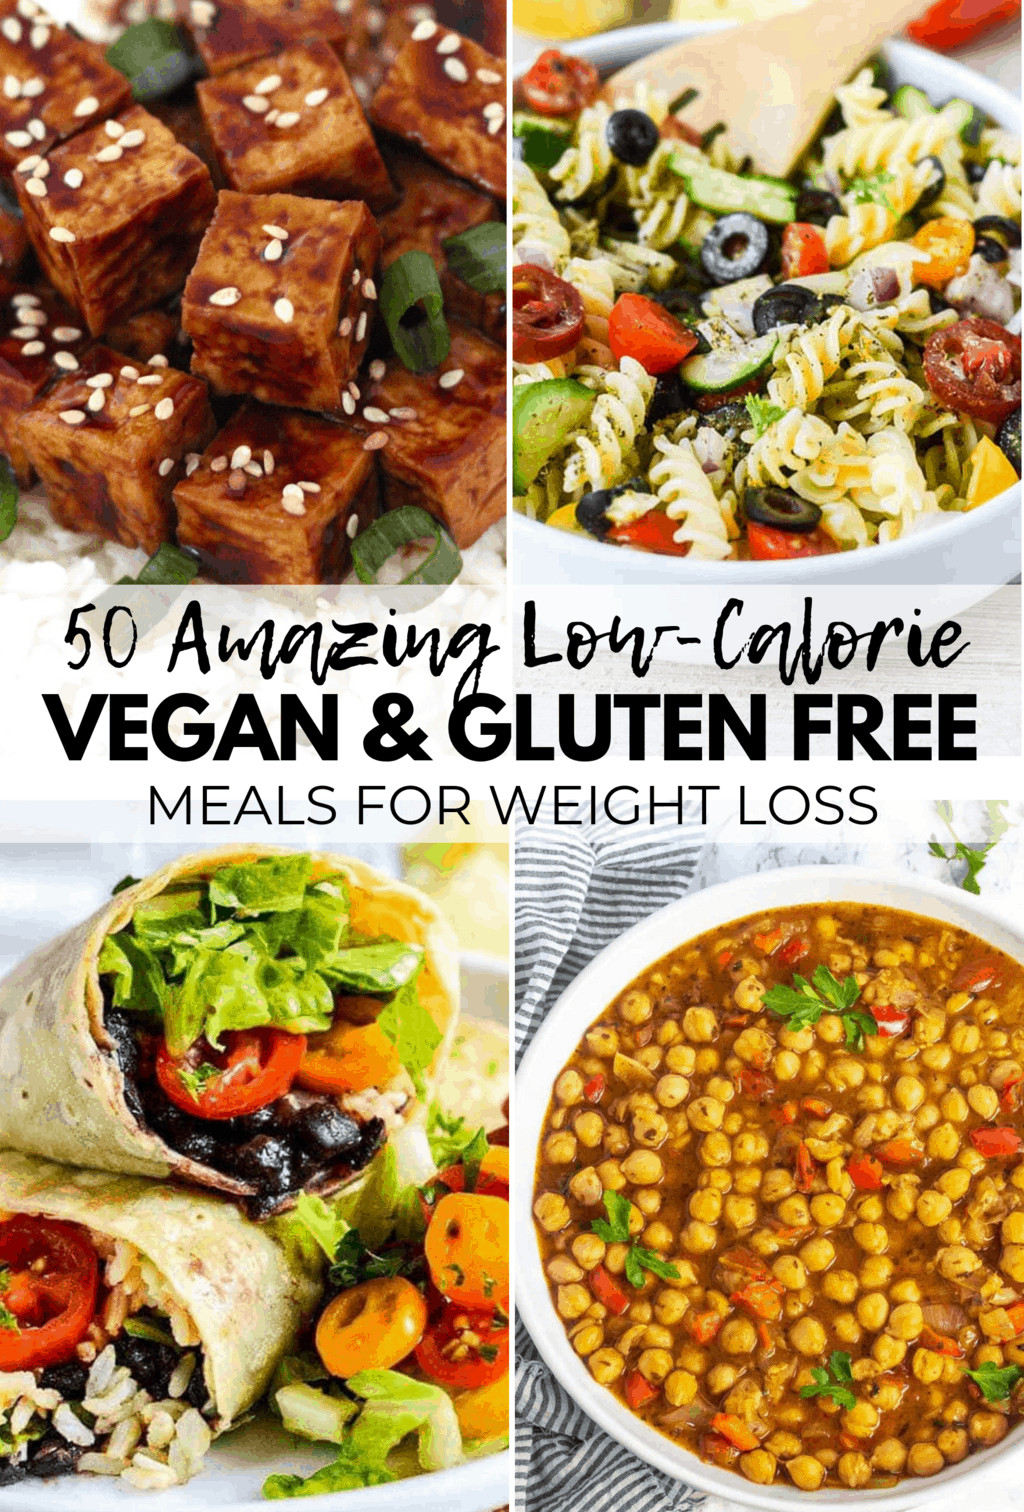 Healthy Vegetarian Dinner Recipes For Weight Loss
 50 AMAZING Vegan Meals for Weight Loss Gluten Free & Low